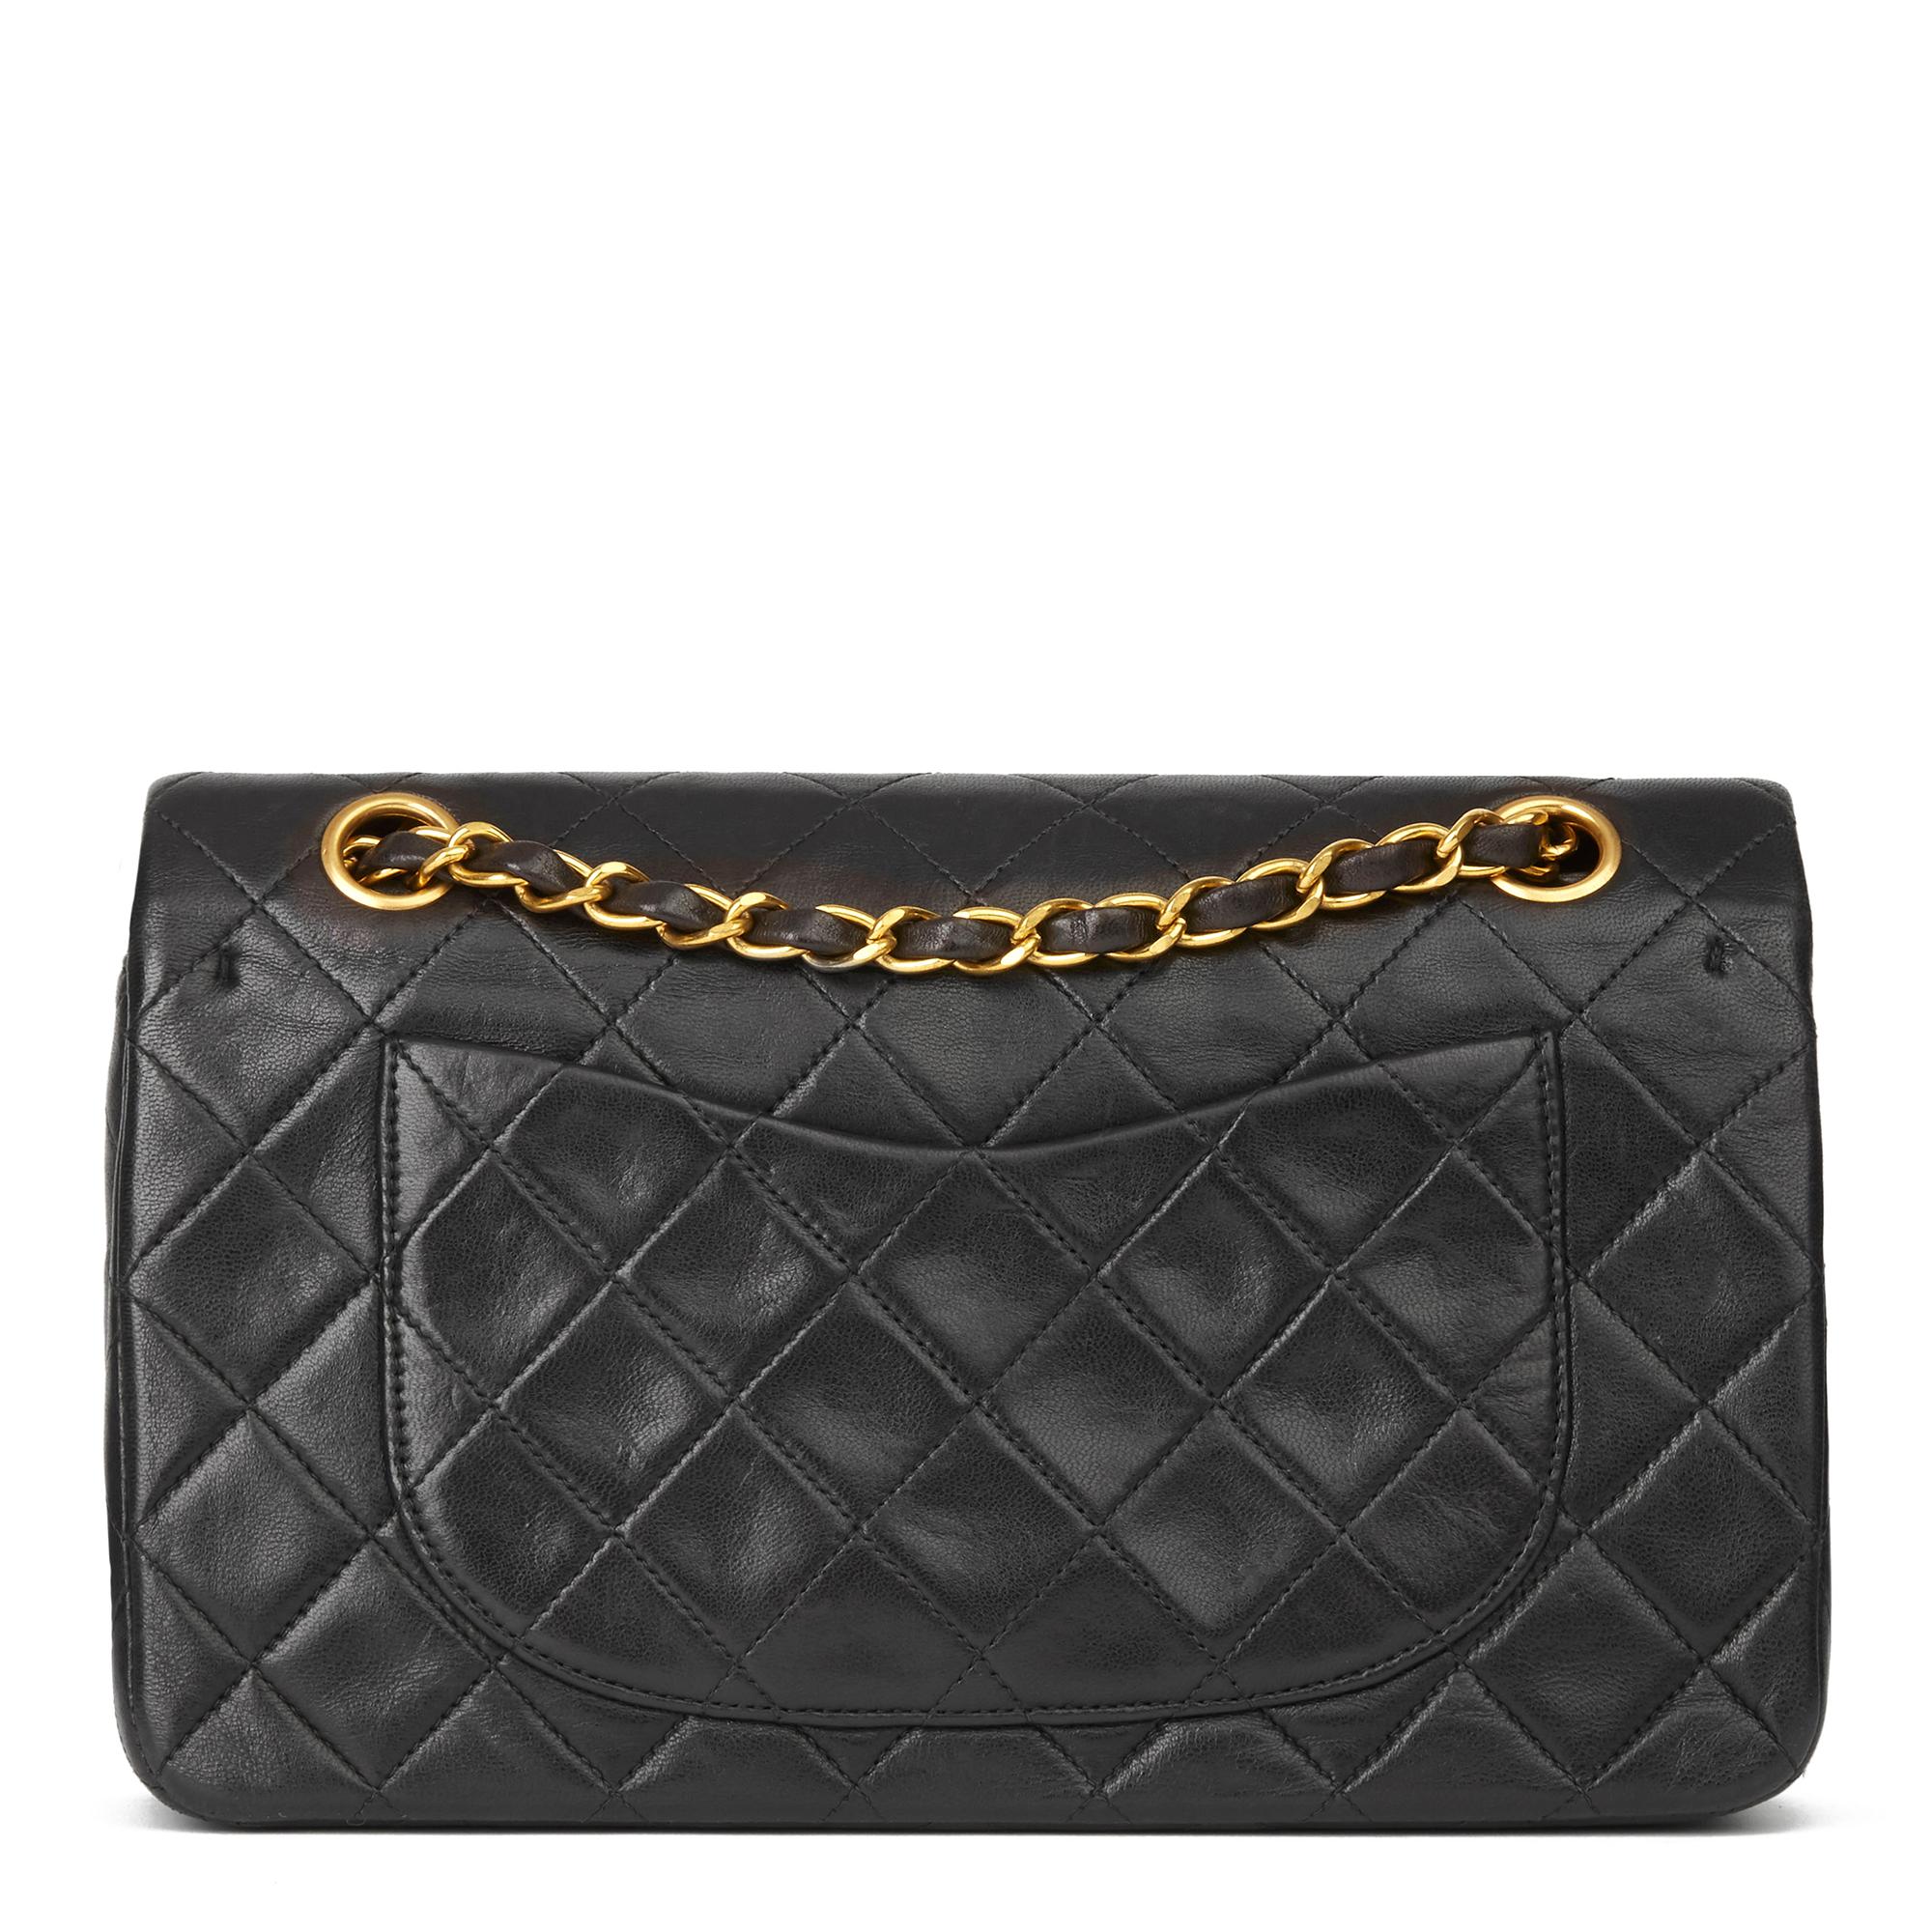 1995 Chanel Black Quilted Lambskin Vintage Small Classic Double Flap Bag 1